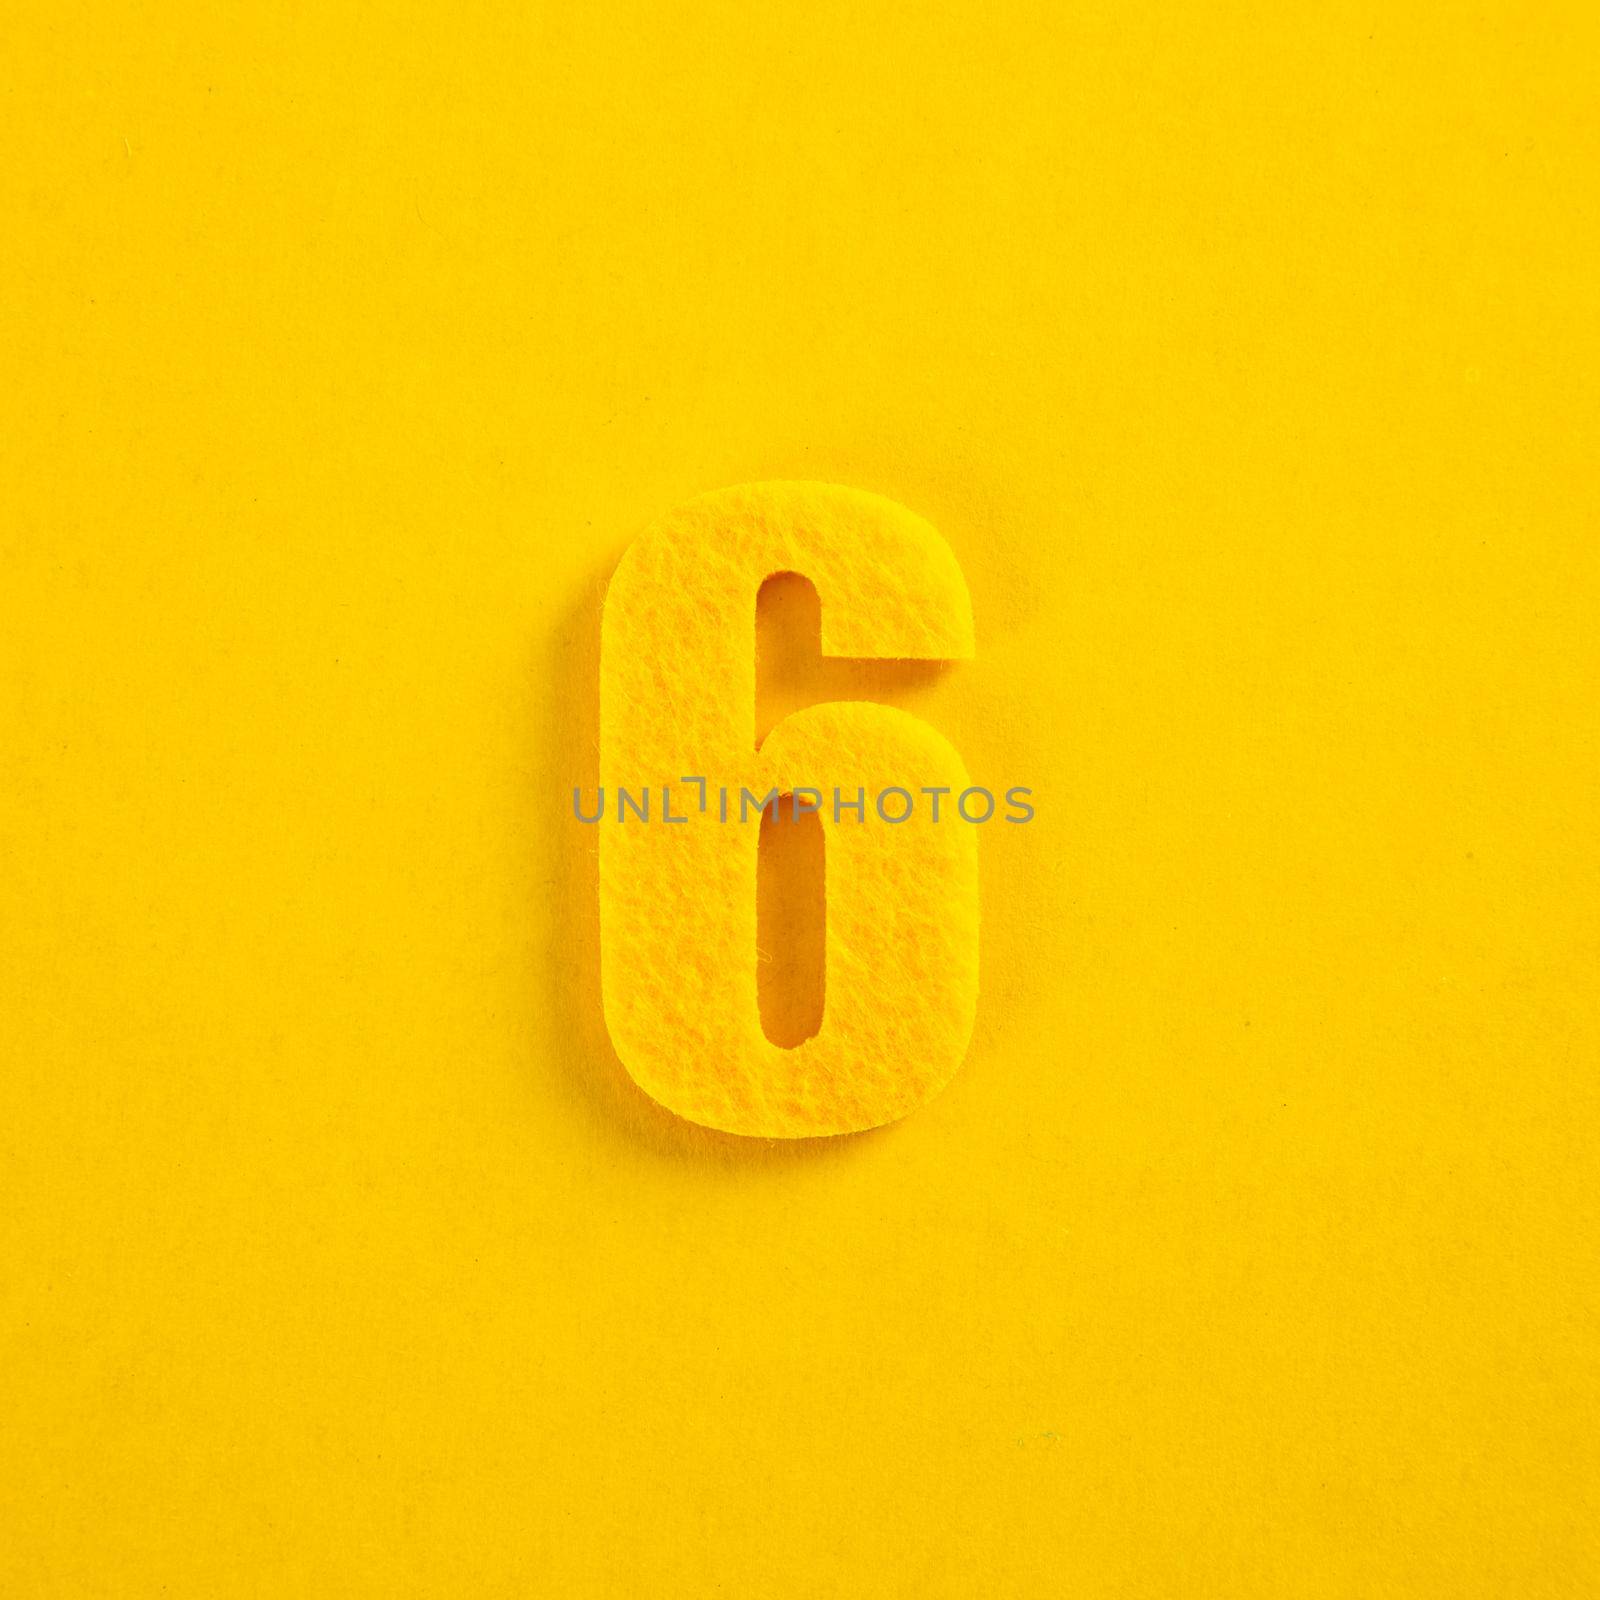 A colorful number on yellow background by tehcheesiong